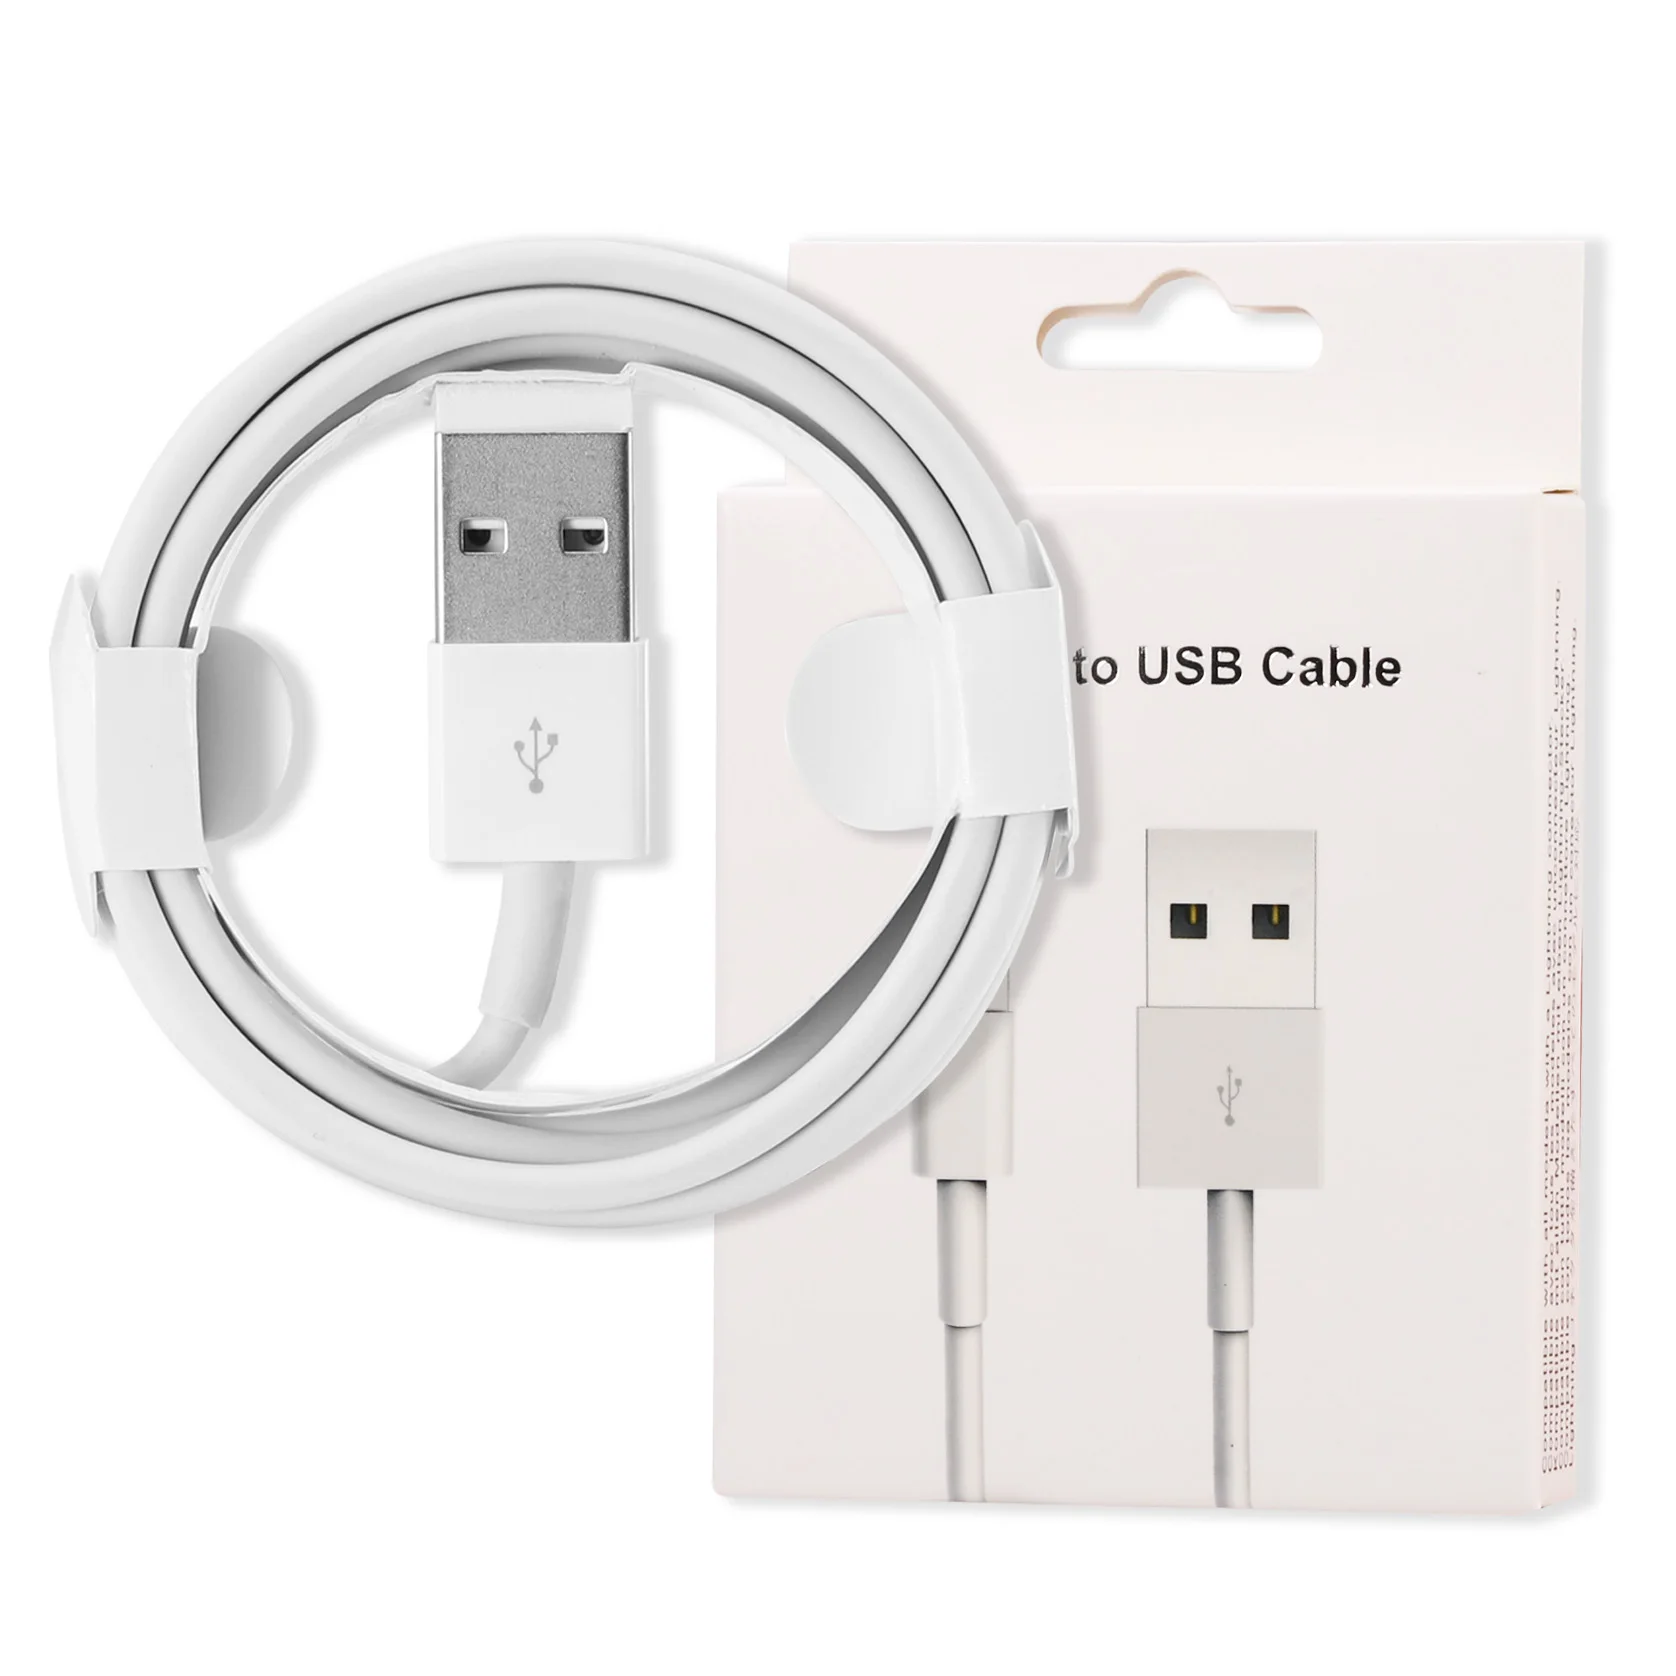 
Original quality white colour usb cable fast charger for iPhone 12 11 Pro xs max iphone 7plus ipad air copper wire  (60742166278)